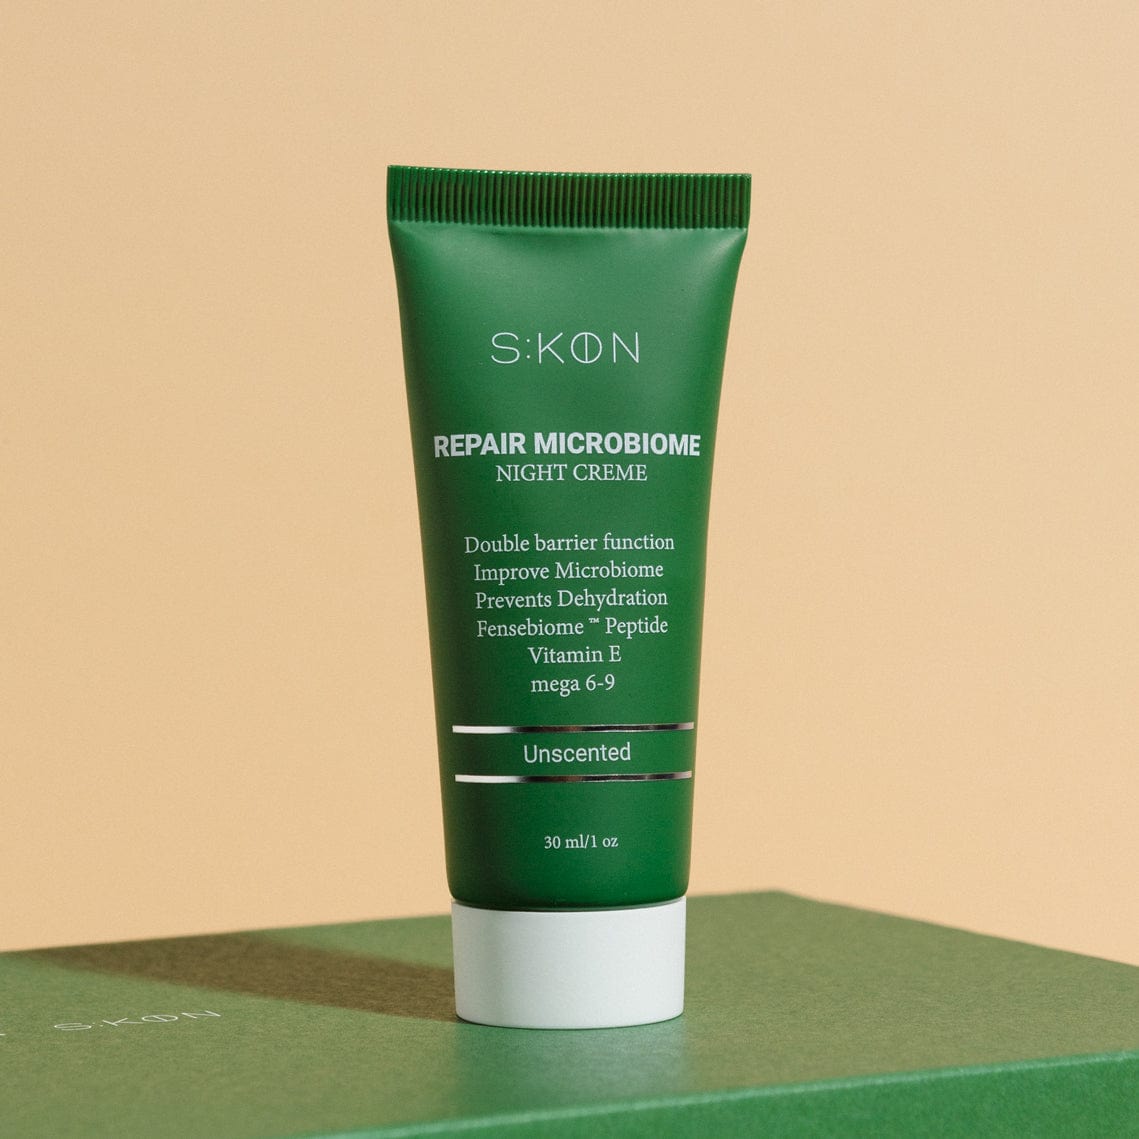 The Limited Edition 'SKØN Skincare' Box